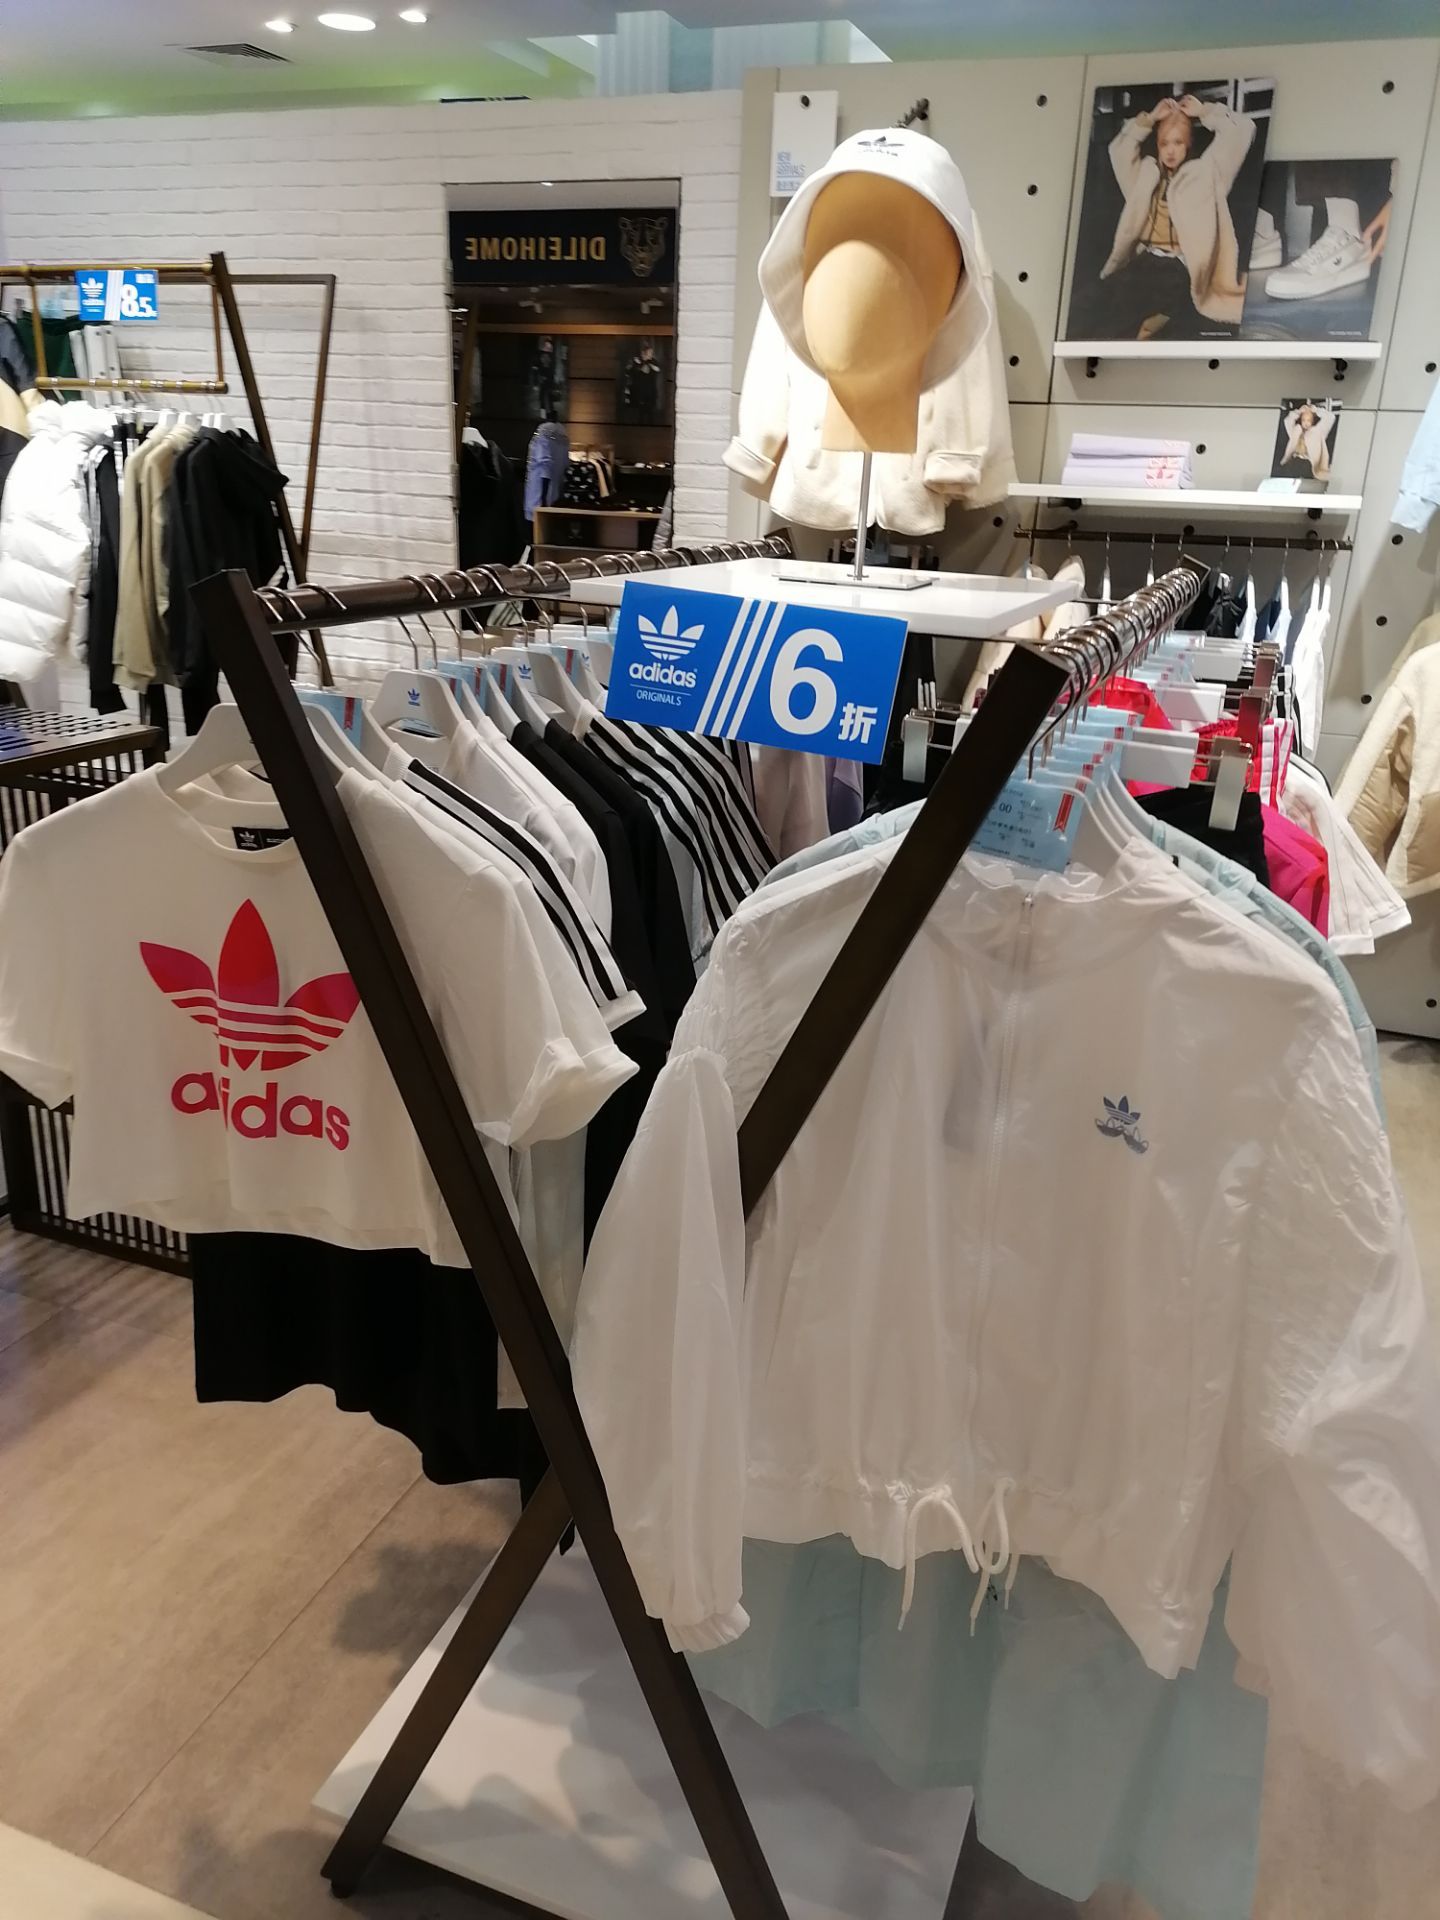 Shopping itineraries adidas in 2023-06-04T17:00:00-07:00 (updated in 2023-06-04T17:00:00-07:00) - Trip.com